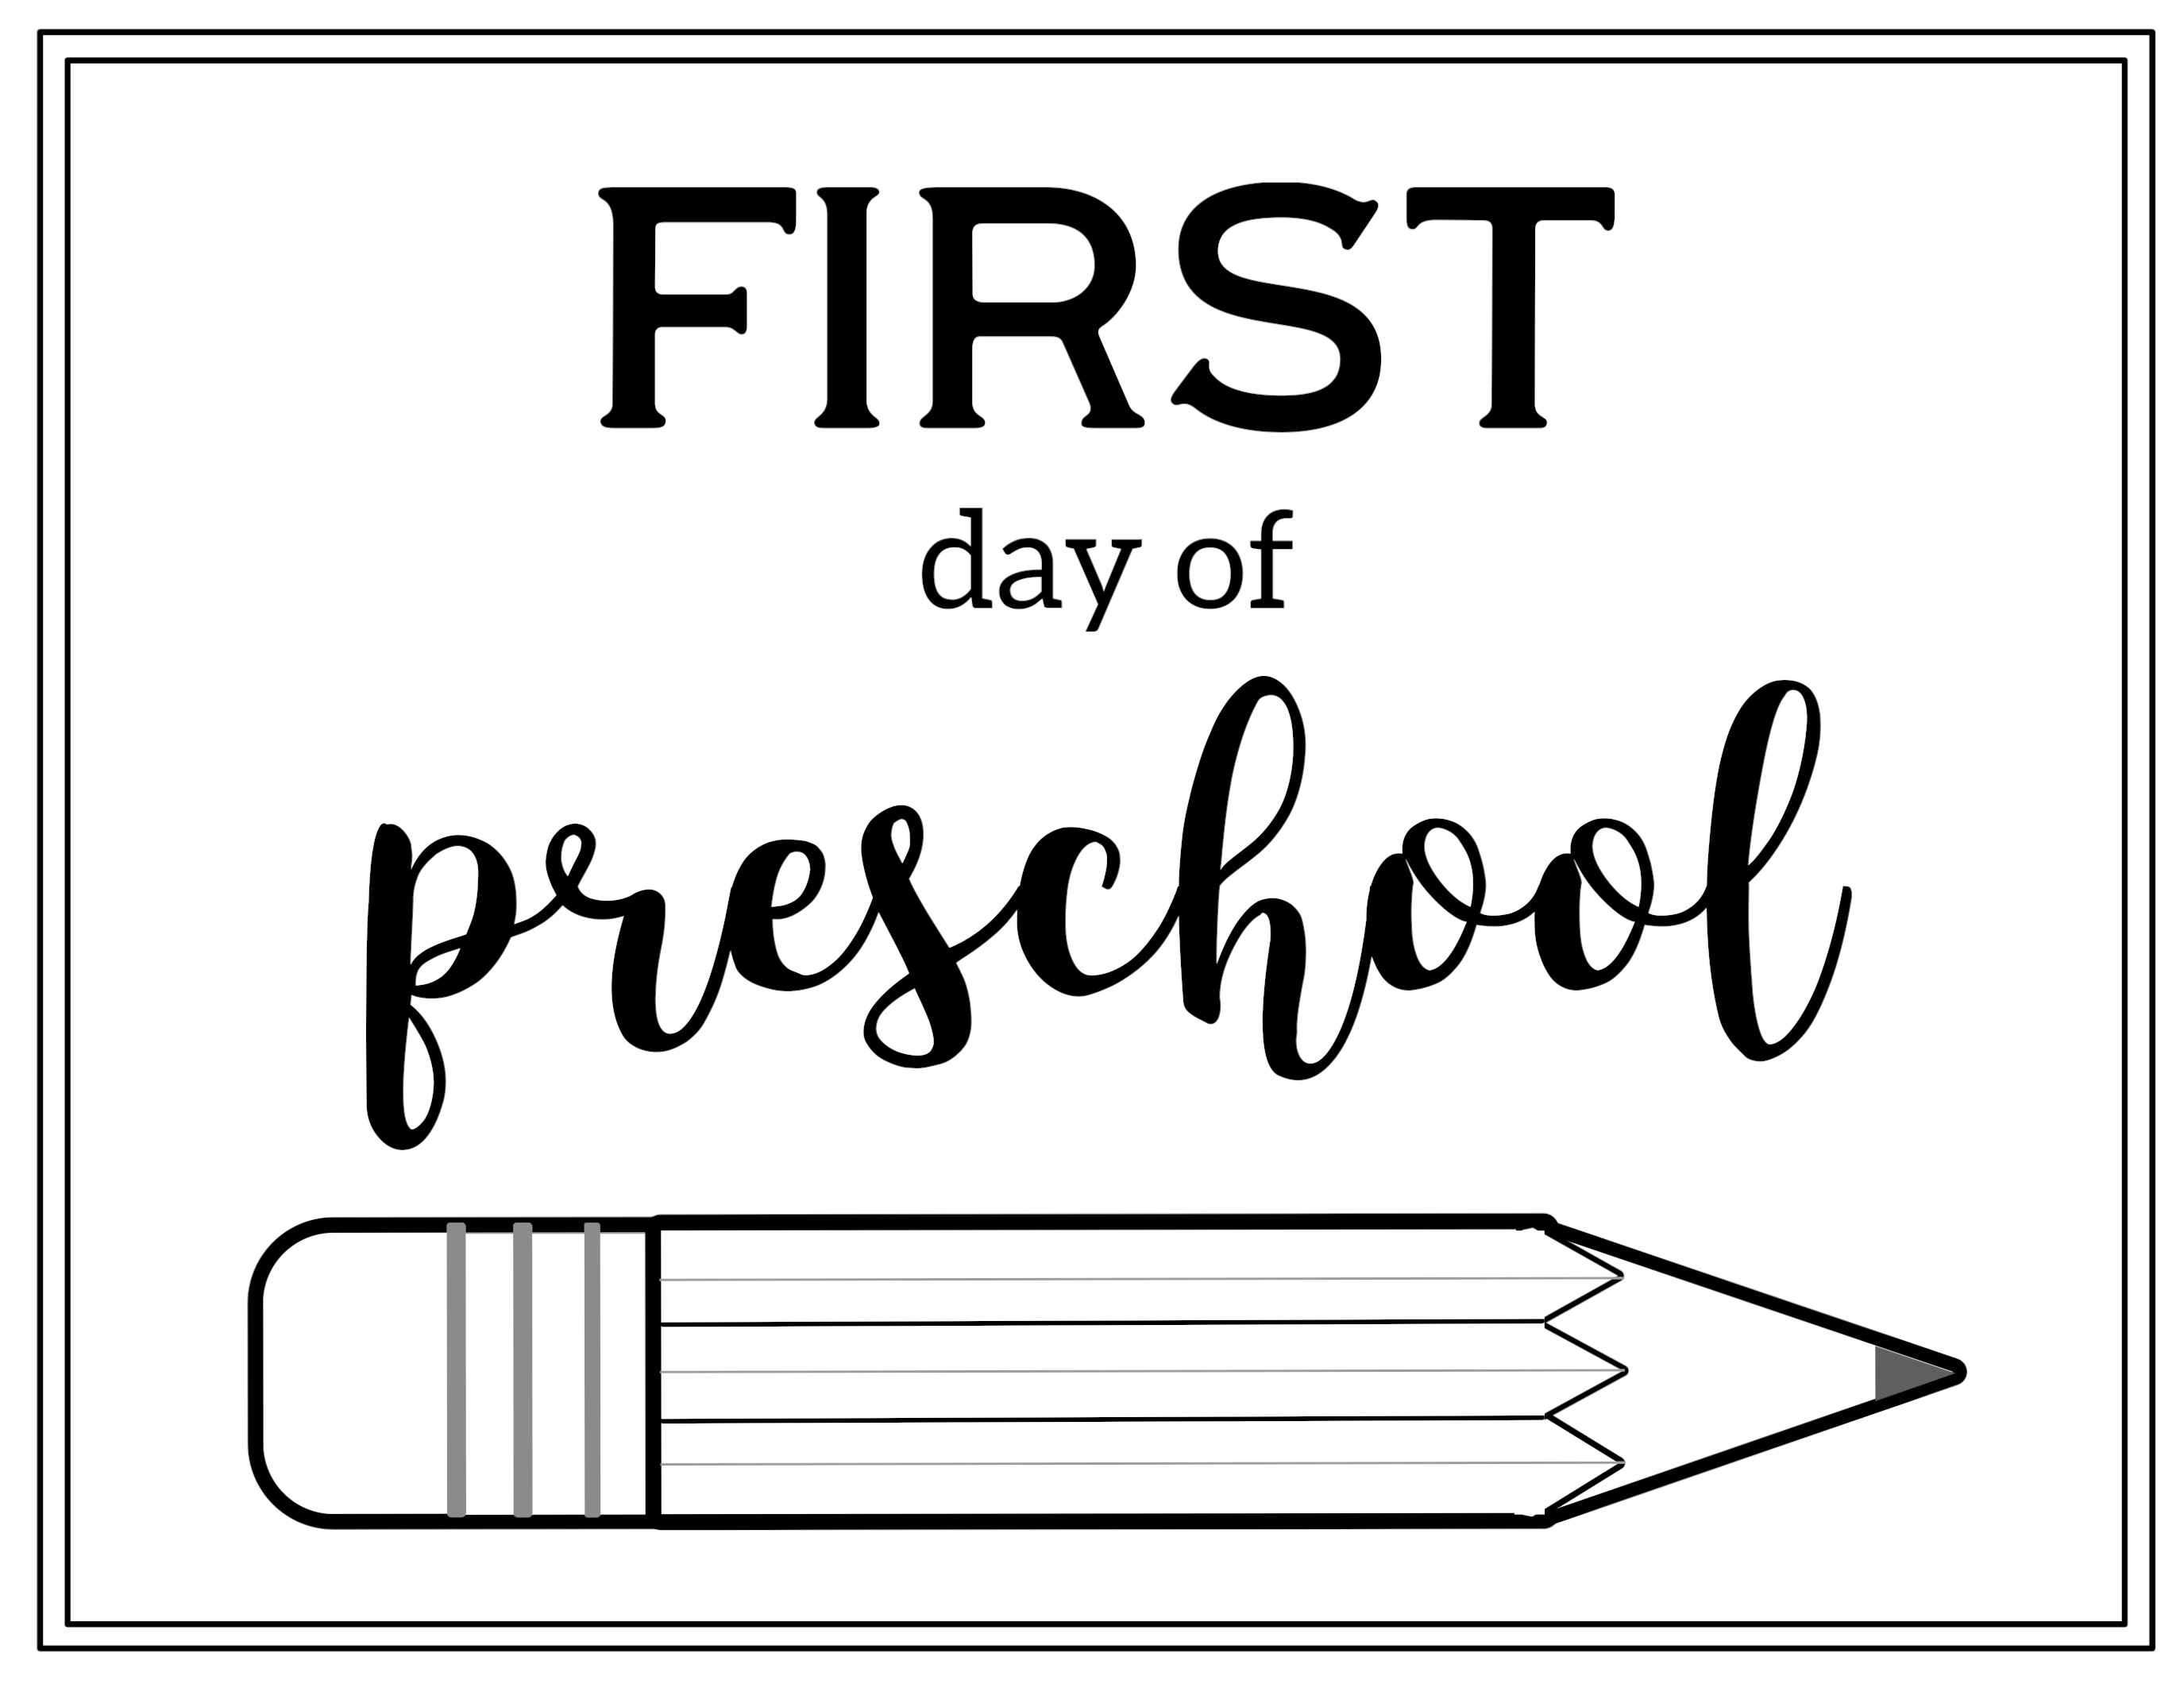 Free Printable First Day of School Sign {Pencil} Paper Trail Design